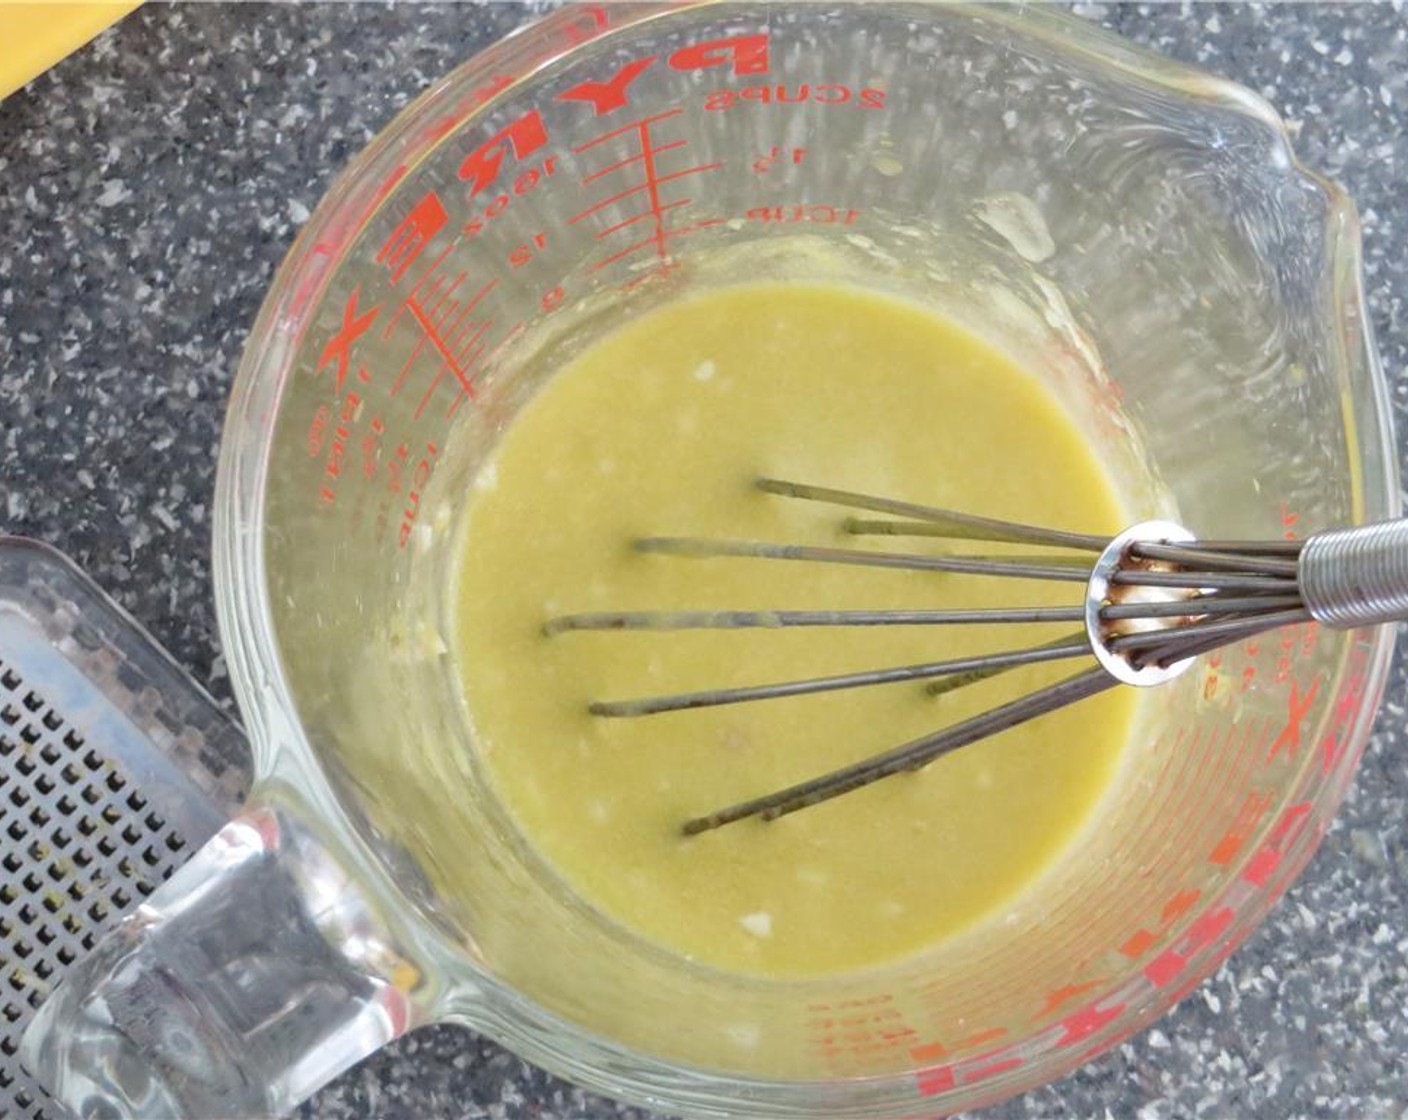 step 7 In a glass measuring cup, add garlic, zest and juice from Lemons (1 1/4), Olive Oil (1/2 cup), and Dijon Mustard (1 Tbsp). Whisk to combine. Pour dressing over the salad. Add fresh mint and fresh basil. Toss to combine. Serve, and enjoy!